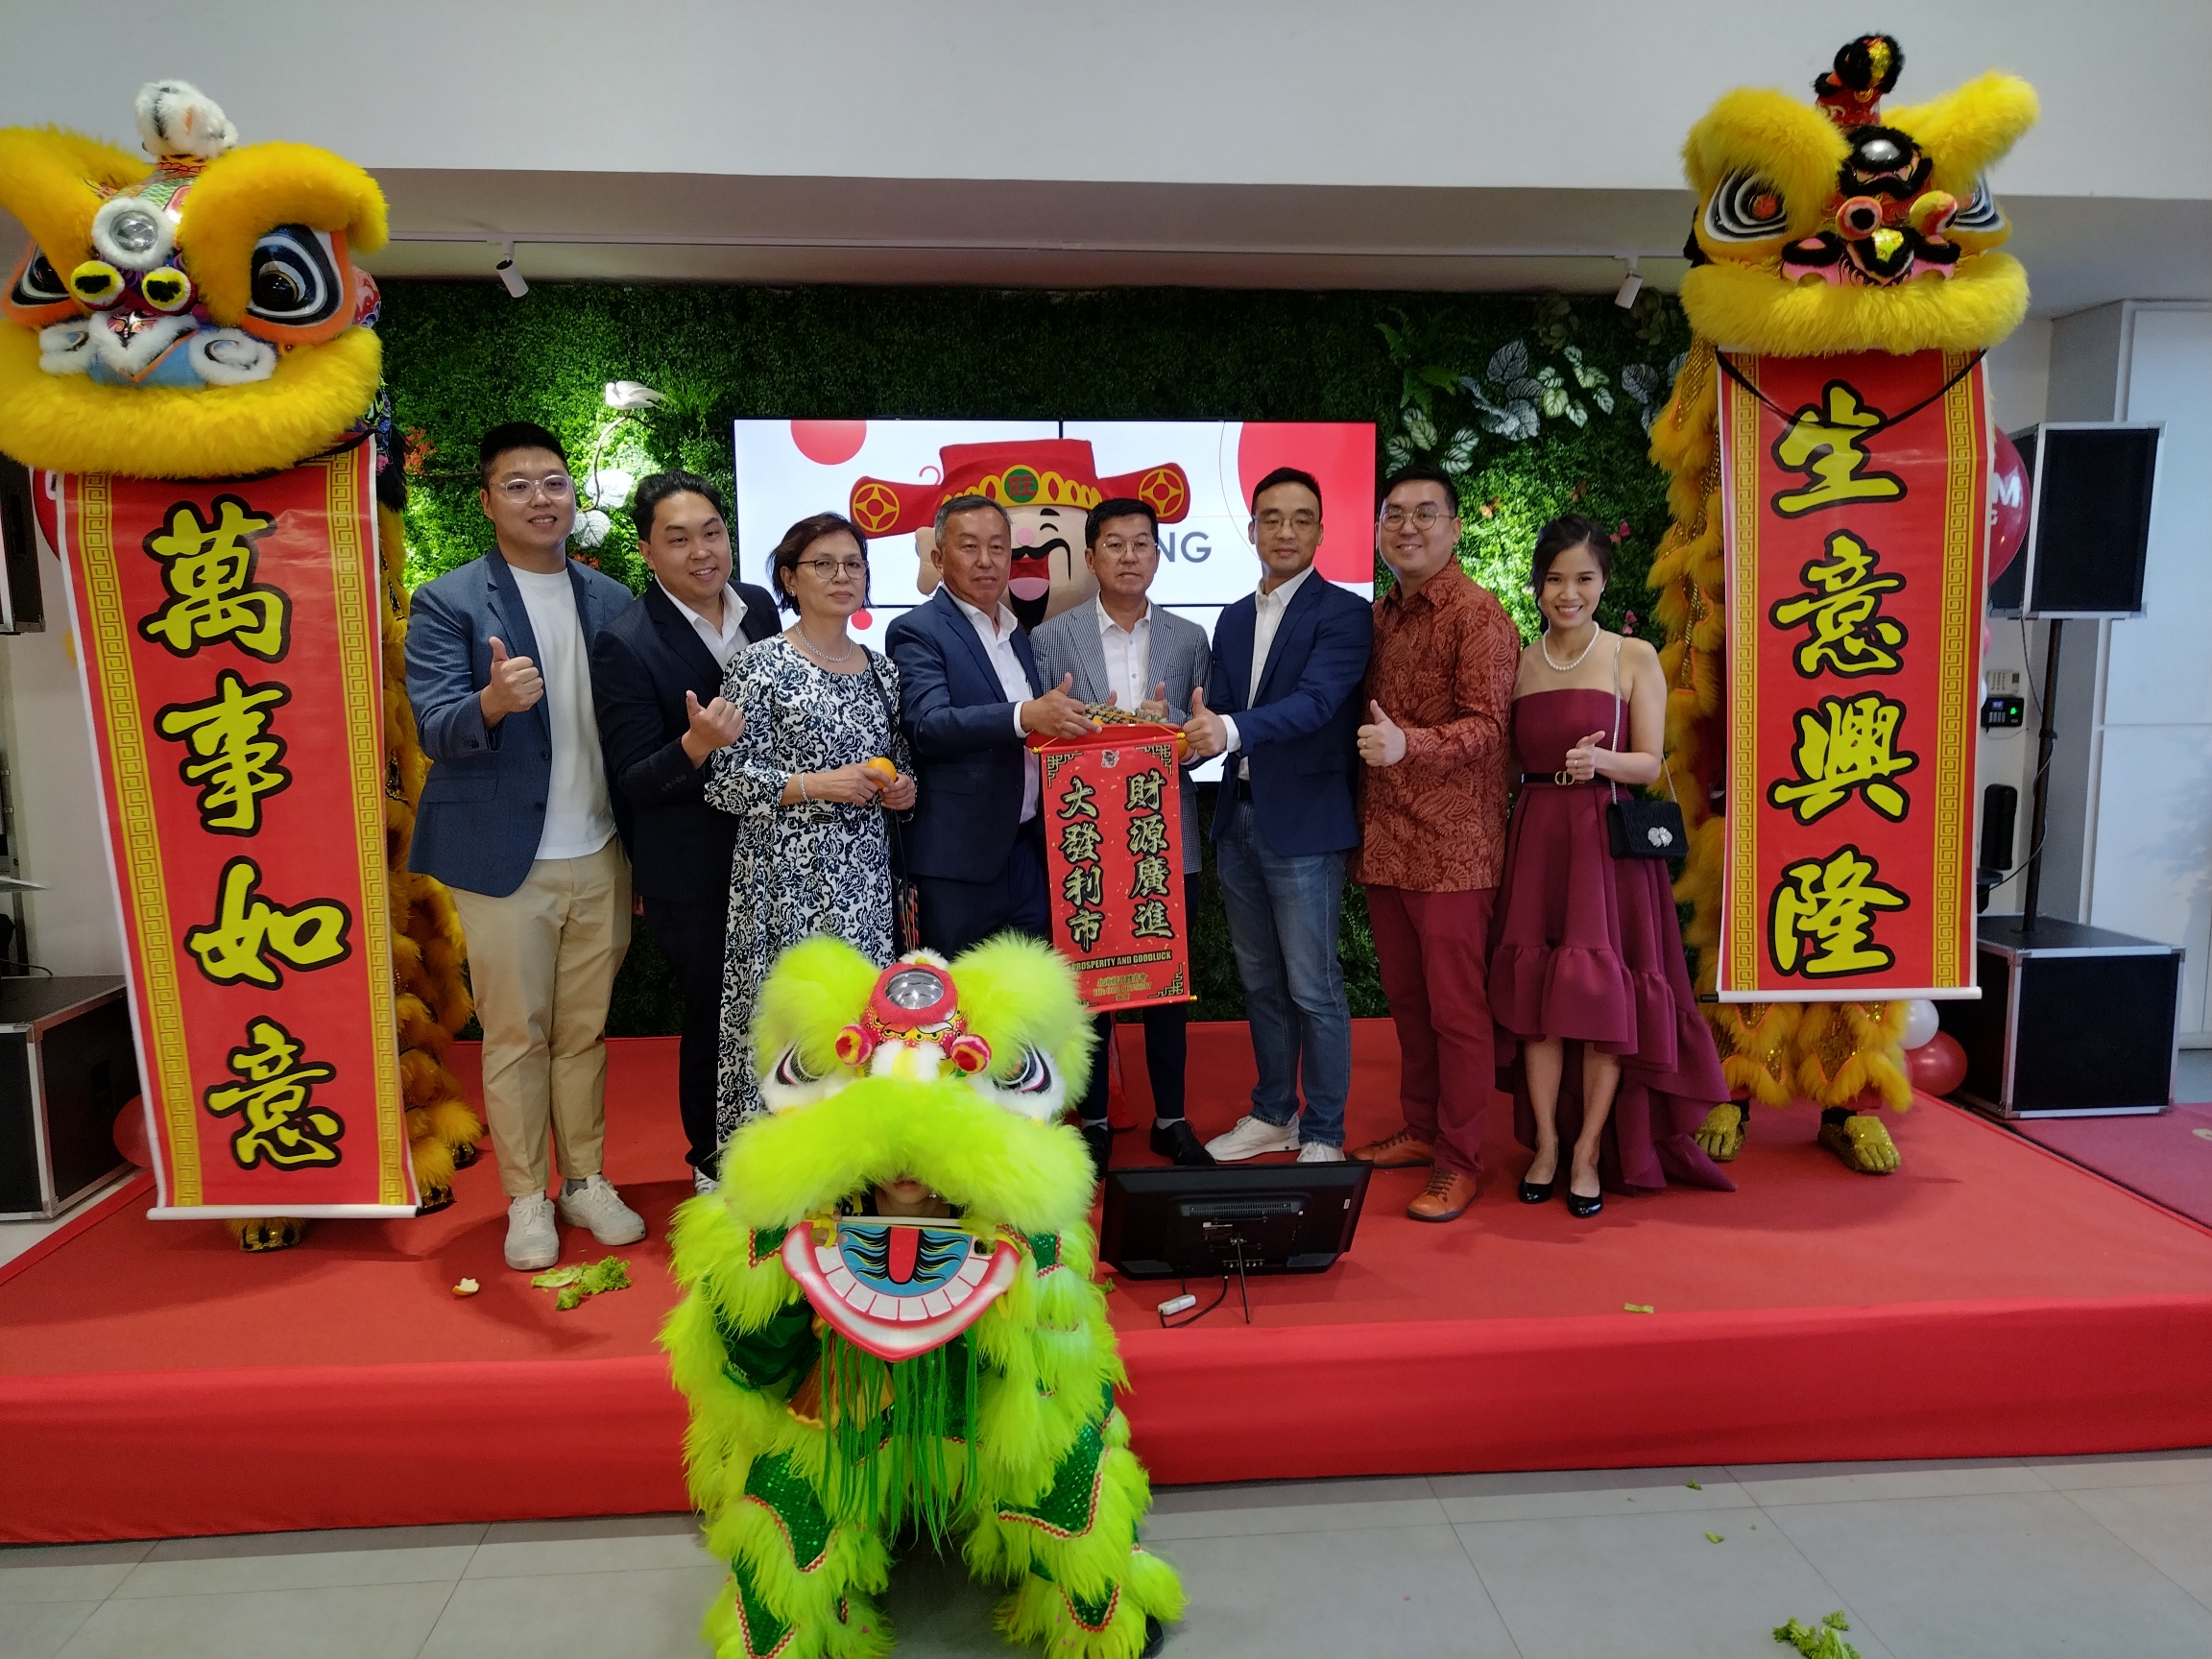 The board members of GWM PENANG and Liu Jinghui, the director of China Great Wall Motors, took a group photo after accepting the lion dance, picking green and auspicious, symbolizing the grand development of the business of both parties.